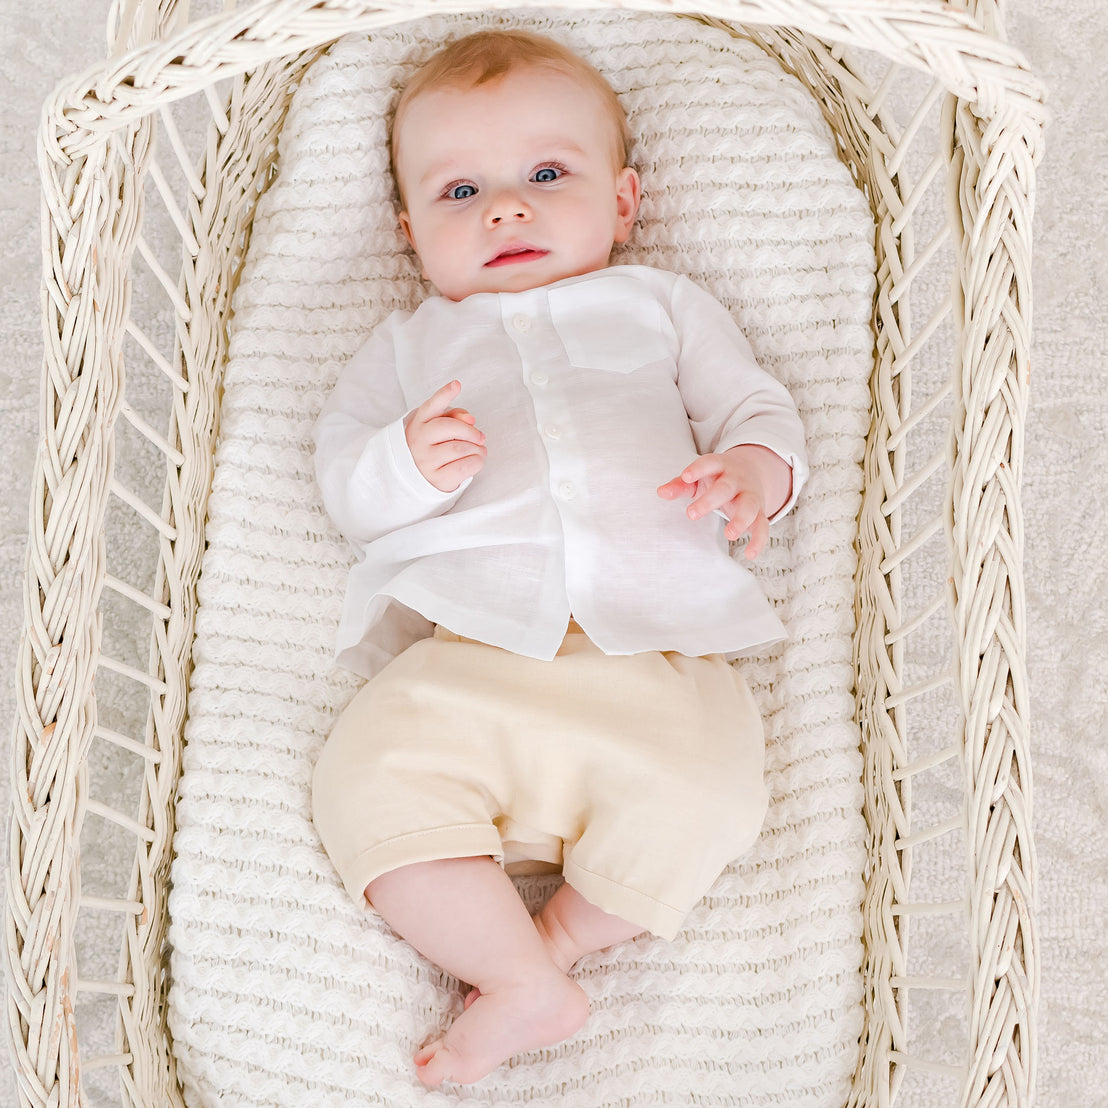 Baby boy in a crib wearing the Silas White Linen Shirt